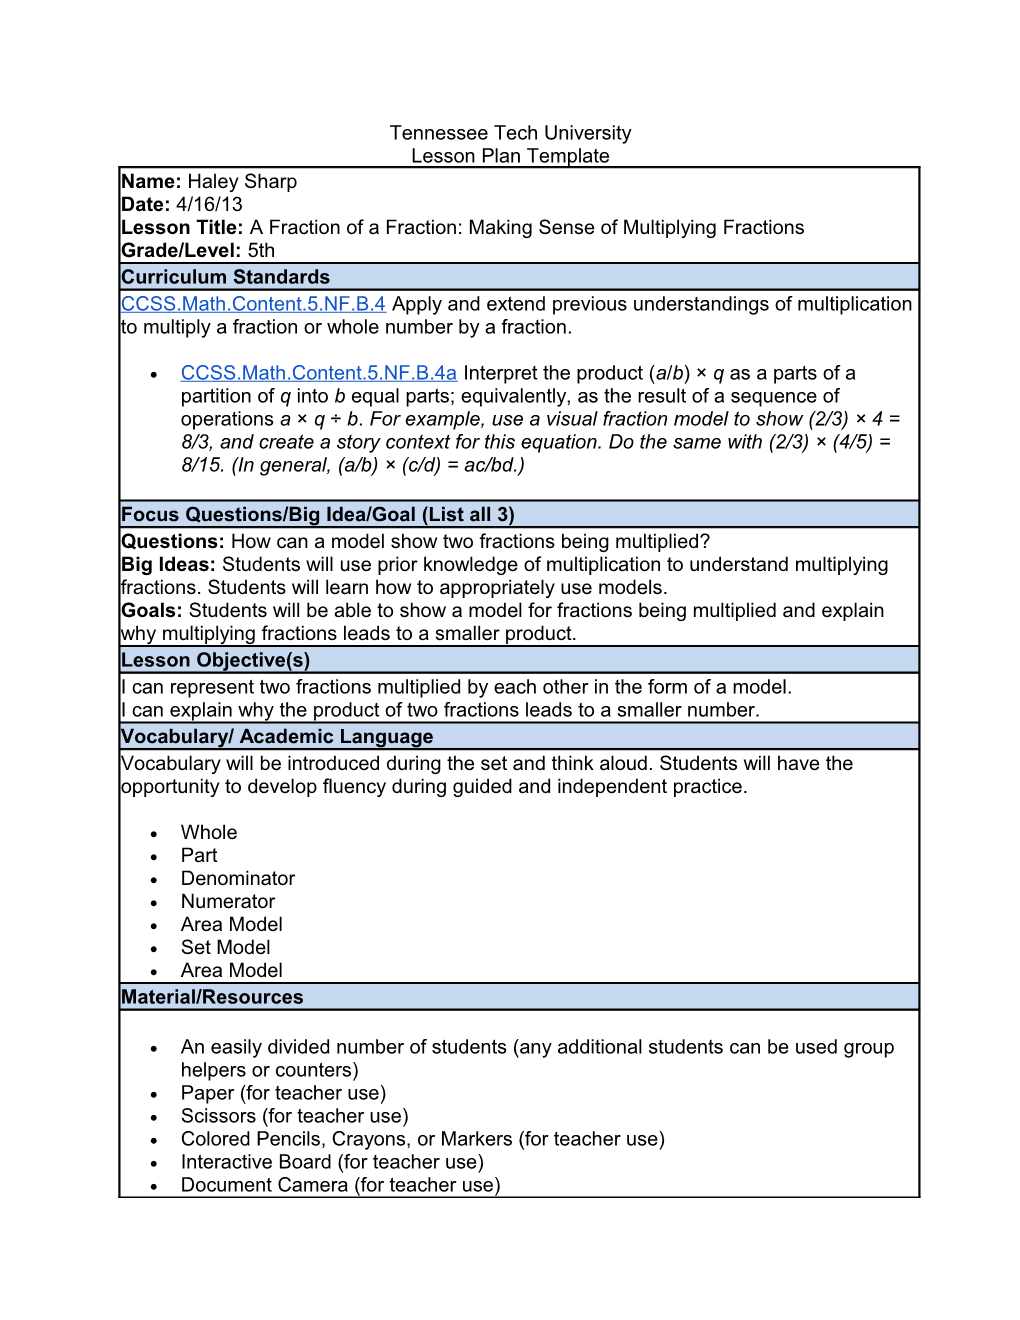 Tennessee Tech University Lesson Plan Template